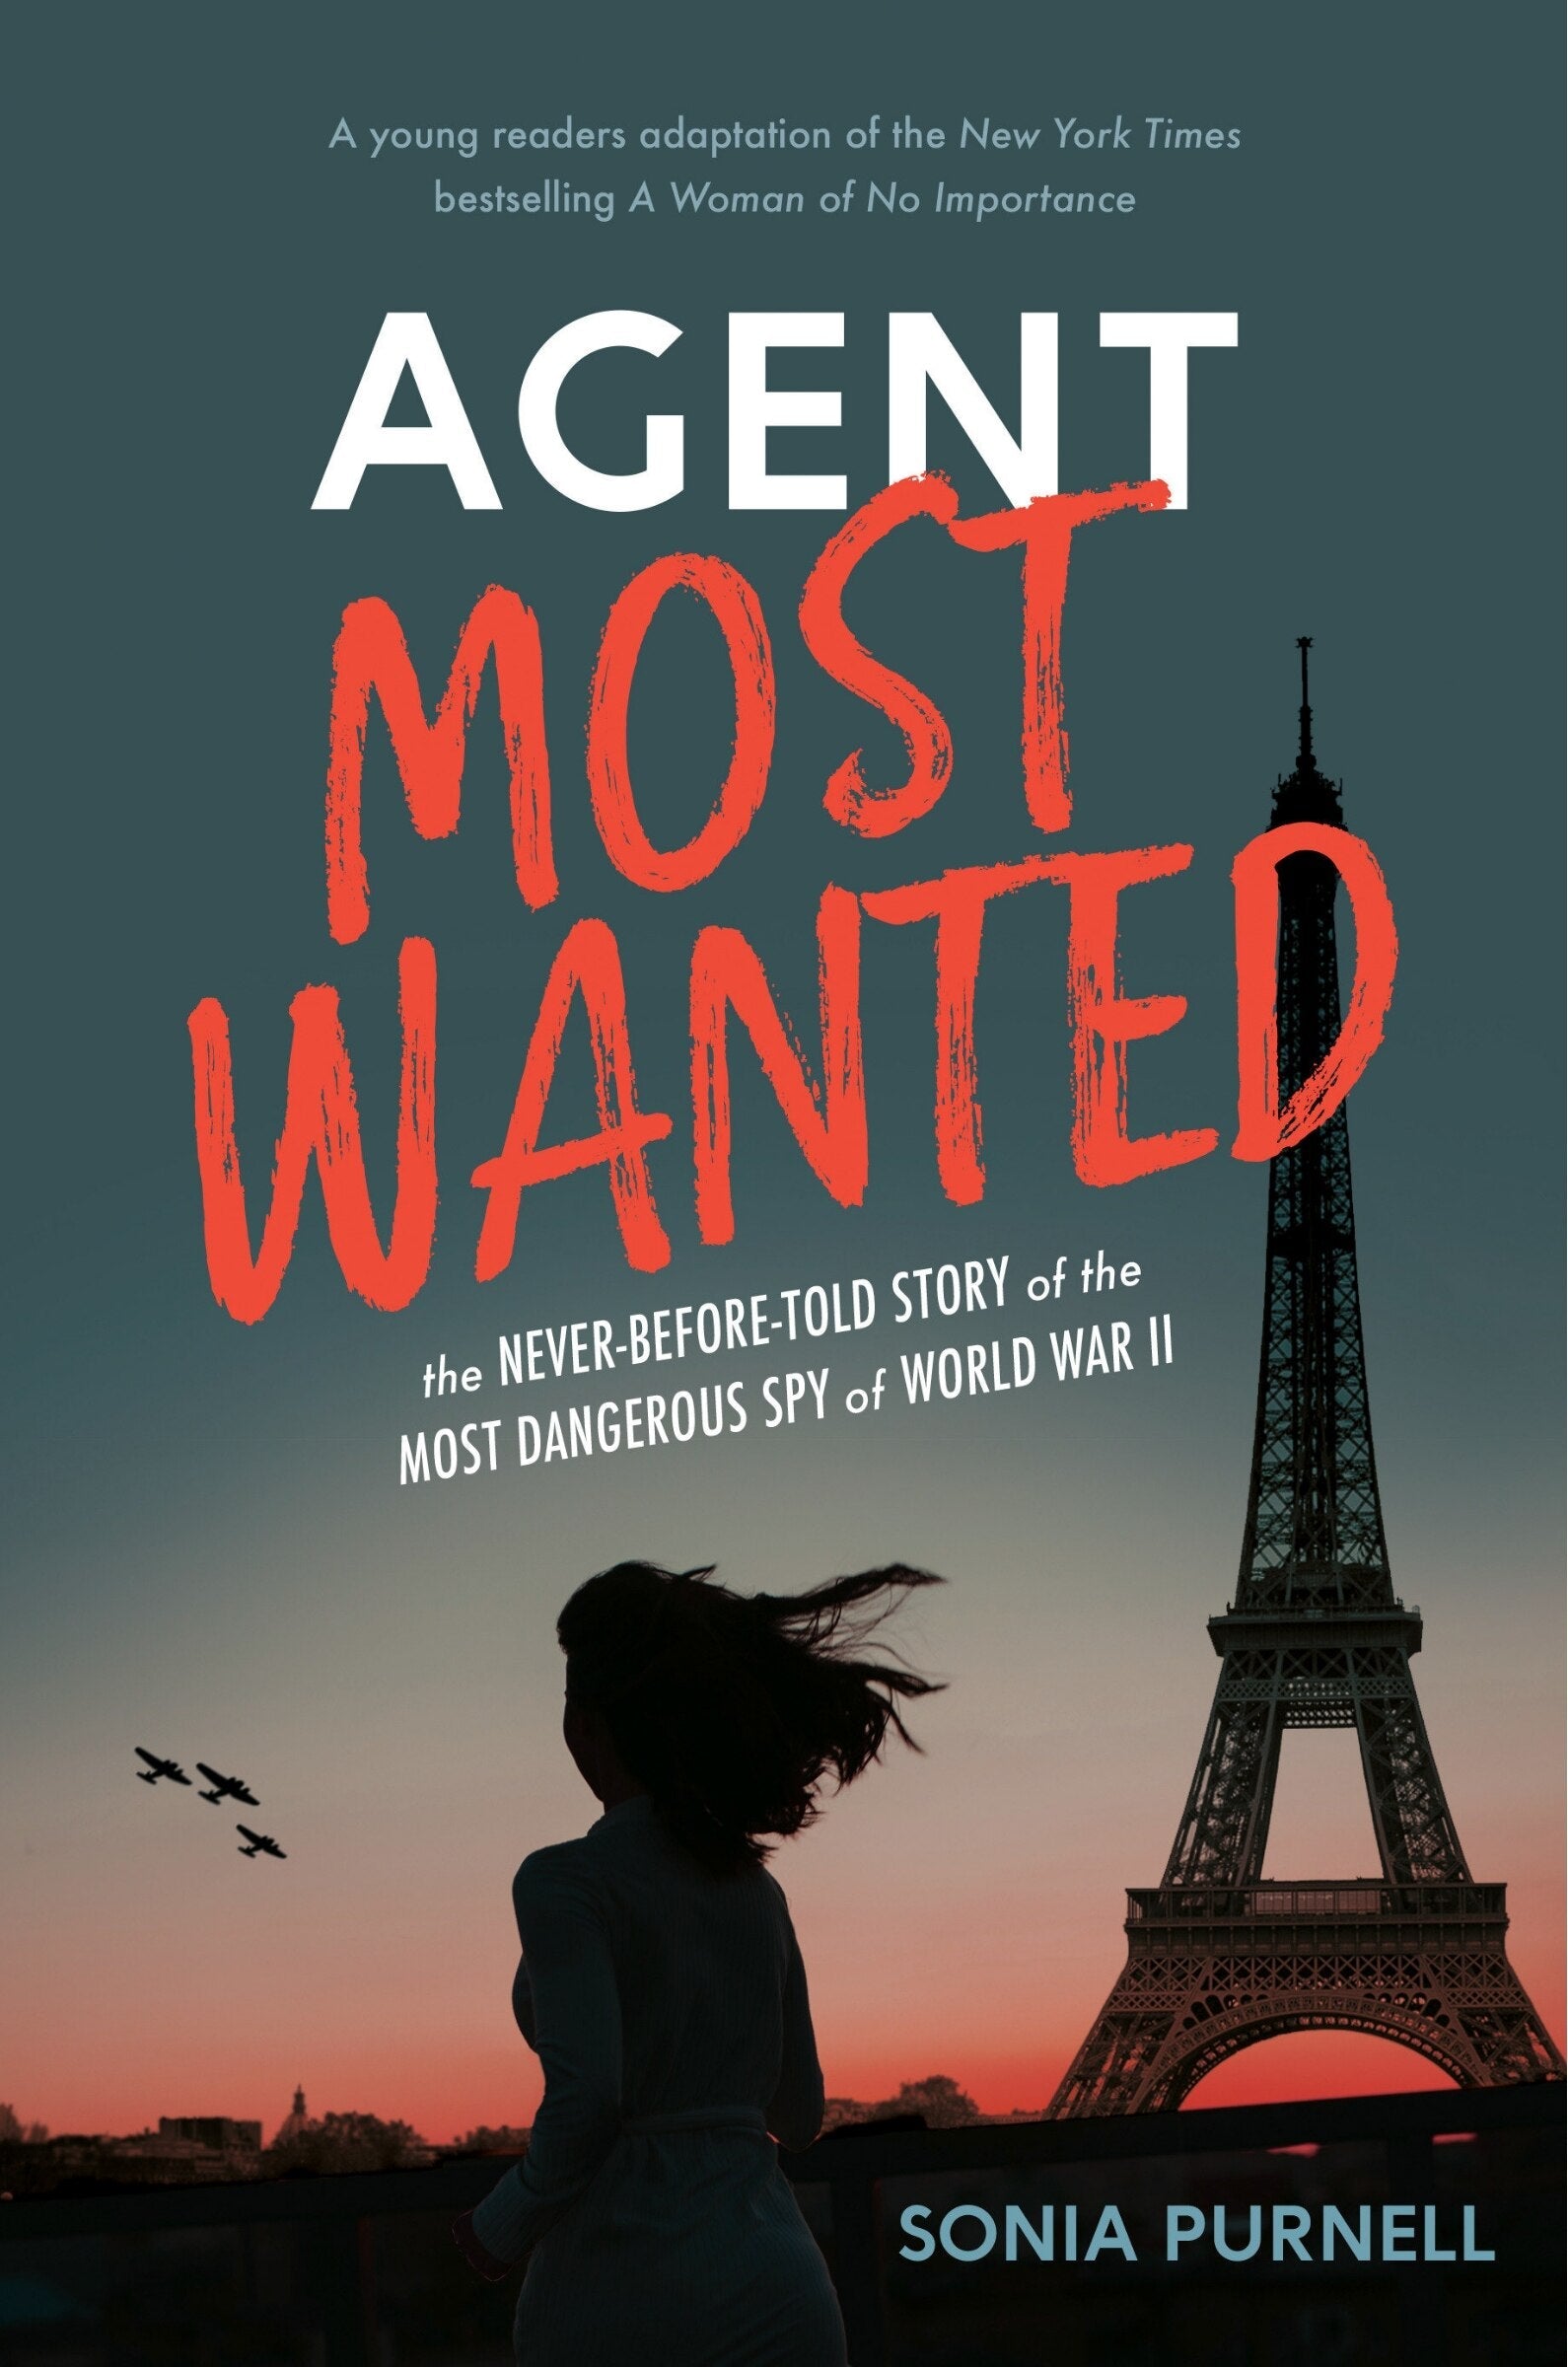 Agent Most Wanted: The Never-Before-Told Story of the Most Dangerous Spy of World War II - Purnell, Sonia (Hardcover)-Young Adult Biography-9780593350546-BookBizCanada